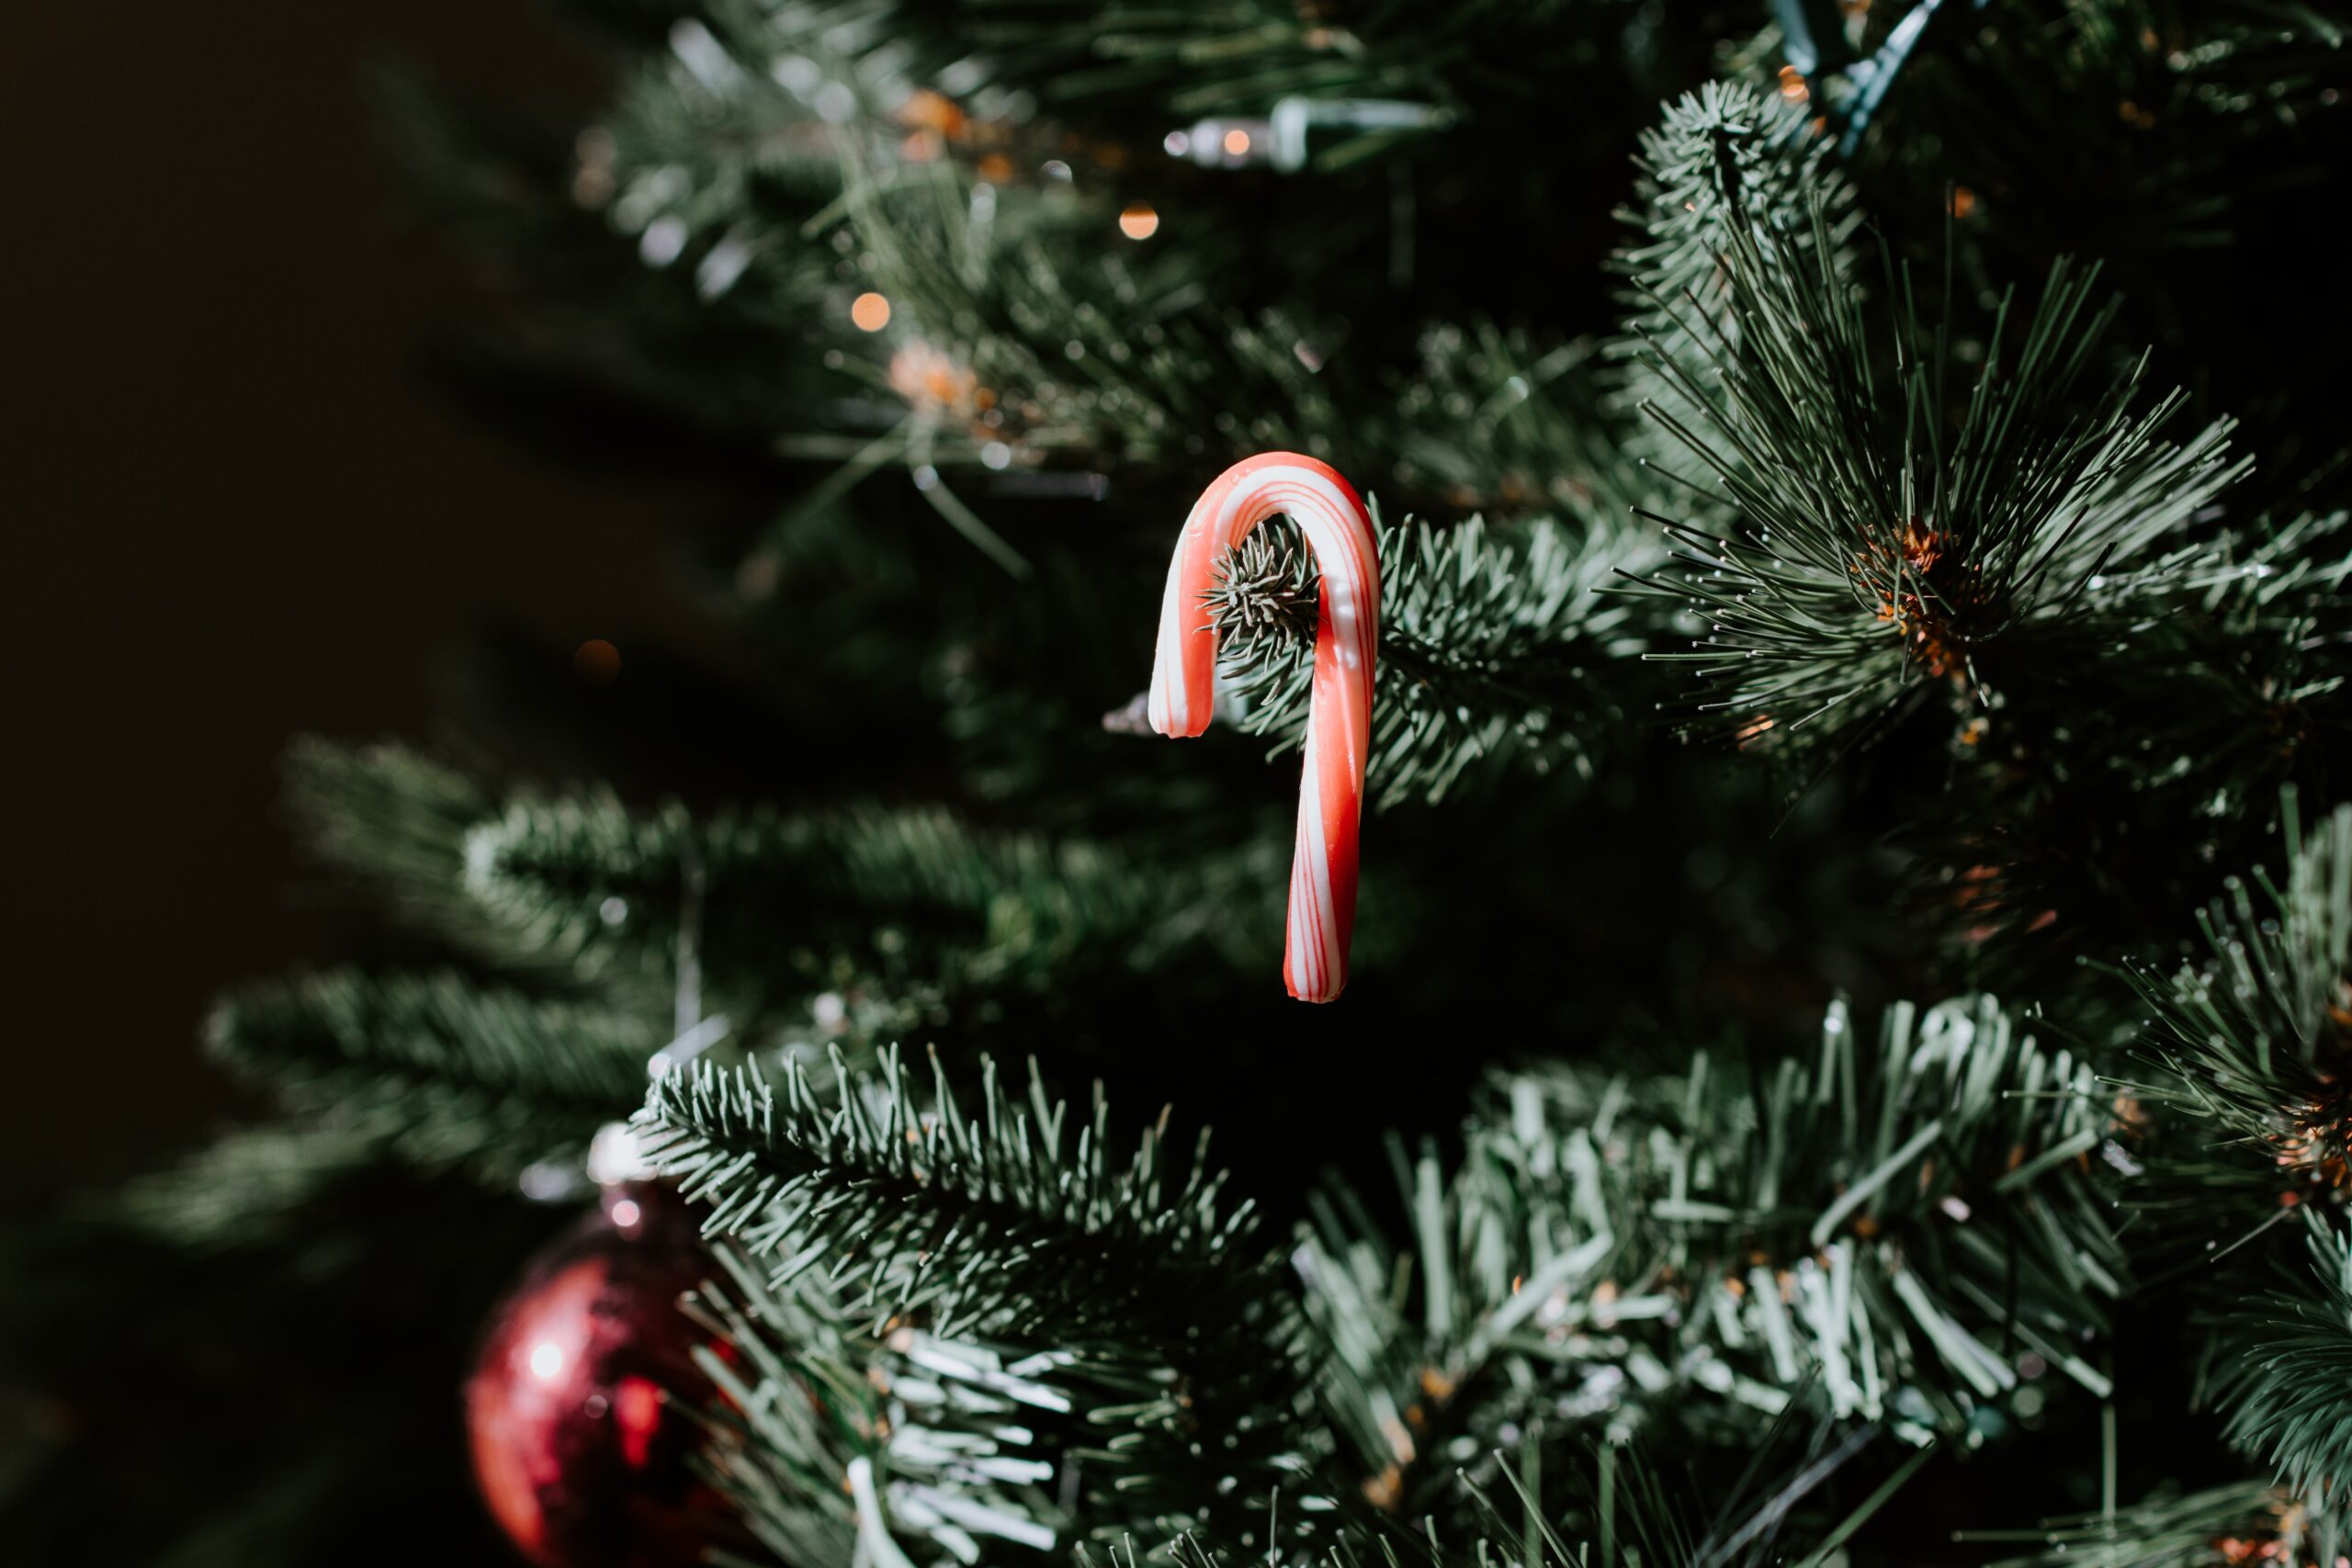 Satisfy your sweet tooth craving by creating a candy and sweets-themed Christmas tree. Use candy canes, candy ornaments and gingerbread and cookie decorations for this theme. Pictured: A candy cane hanging from a Christmas tree.